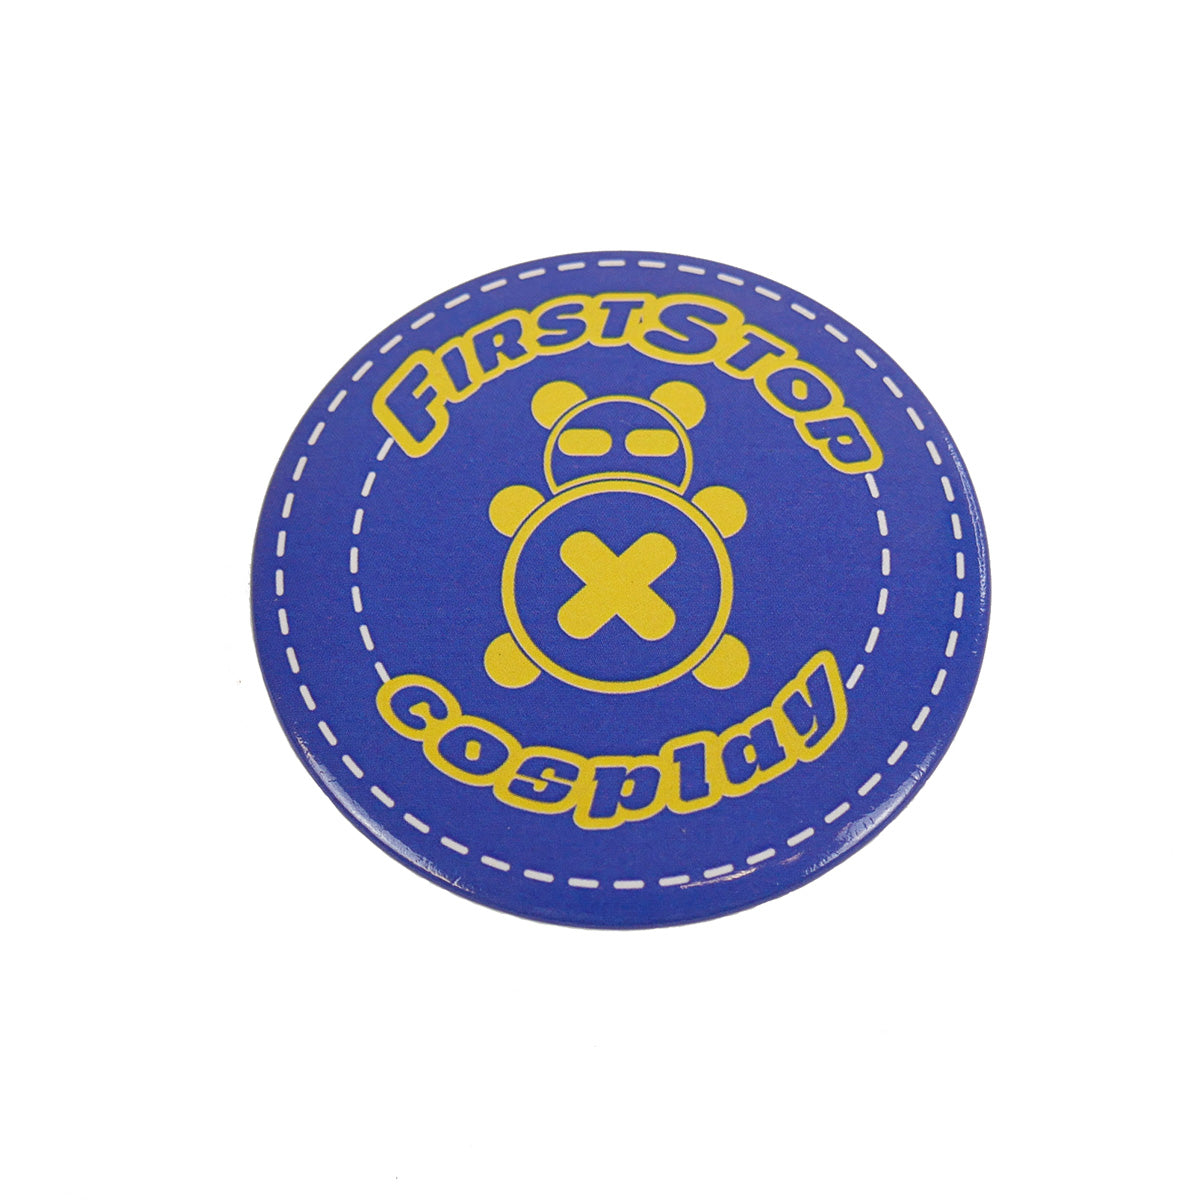 Circle Stitch Logo button: a round blue button with yellow text saying, "First Stop Cosplay" surrounding a yellow panda figure named Timmy.